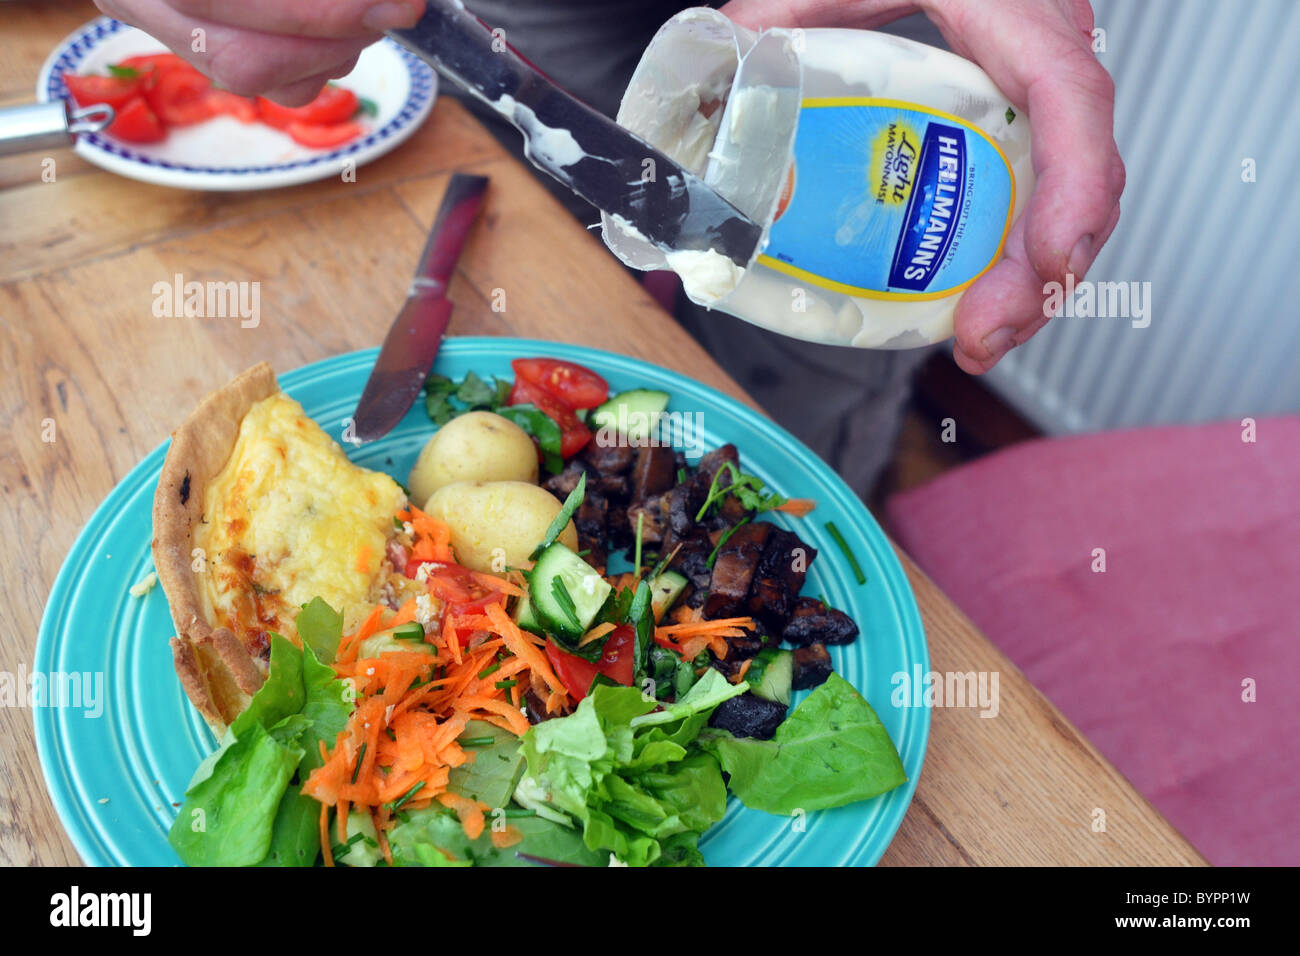 Saving money by cooking, growing food and using every last scrap of mayonnaise Stock Photo